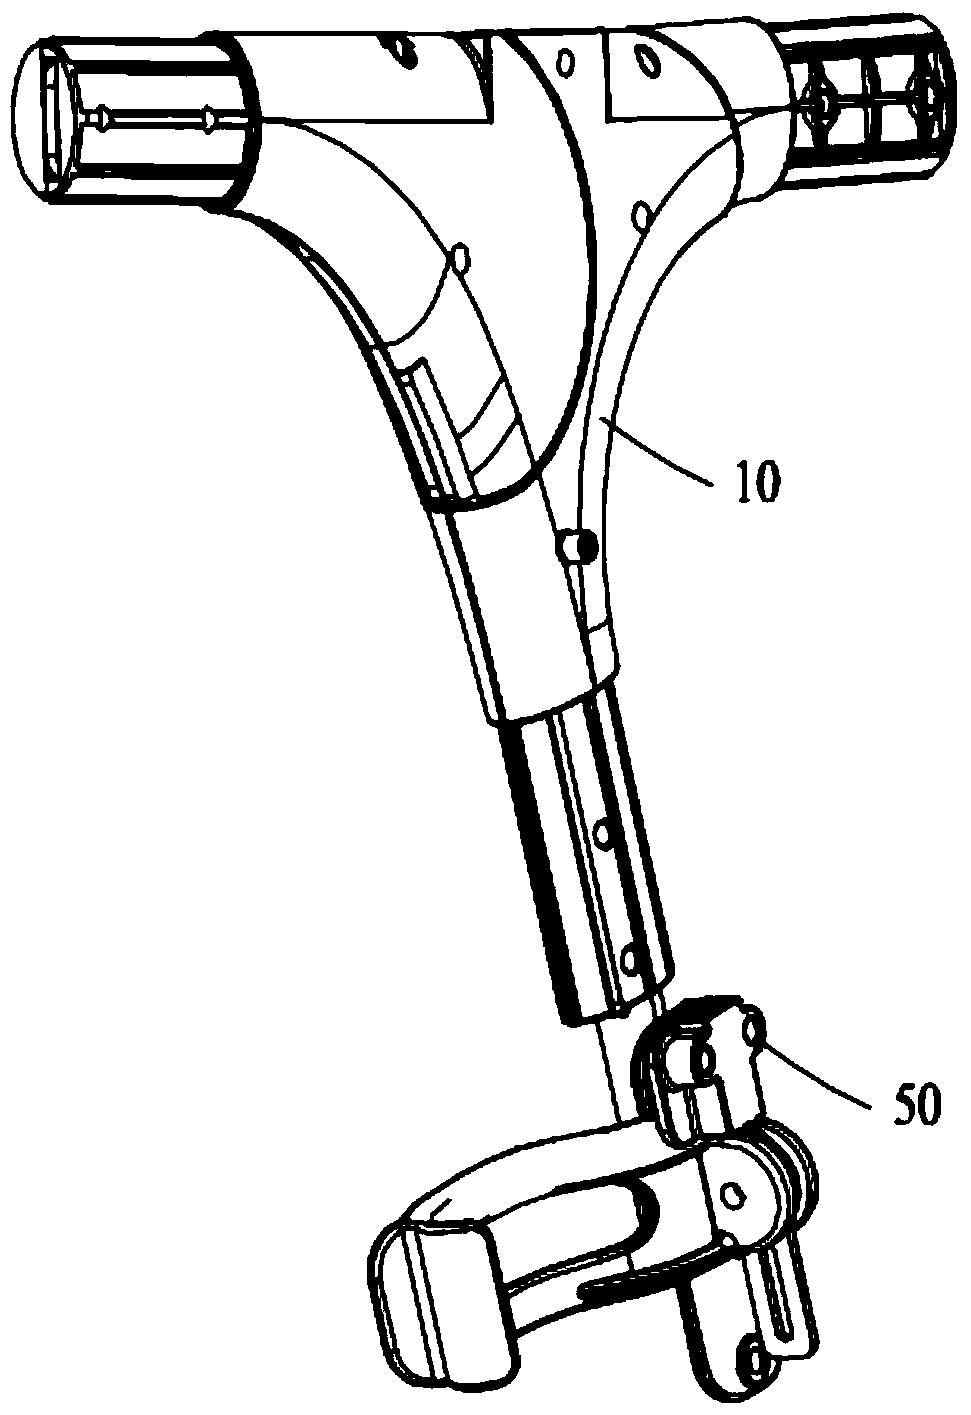 Folding release joints and strollers